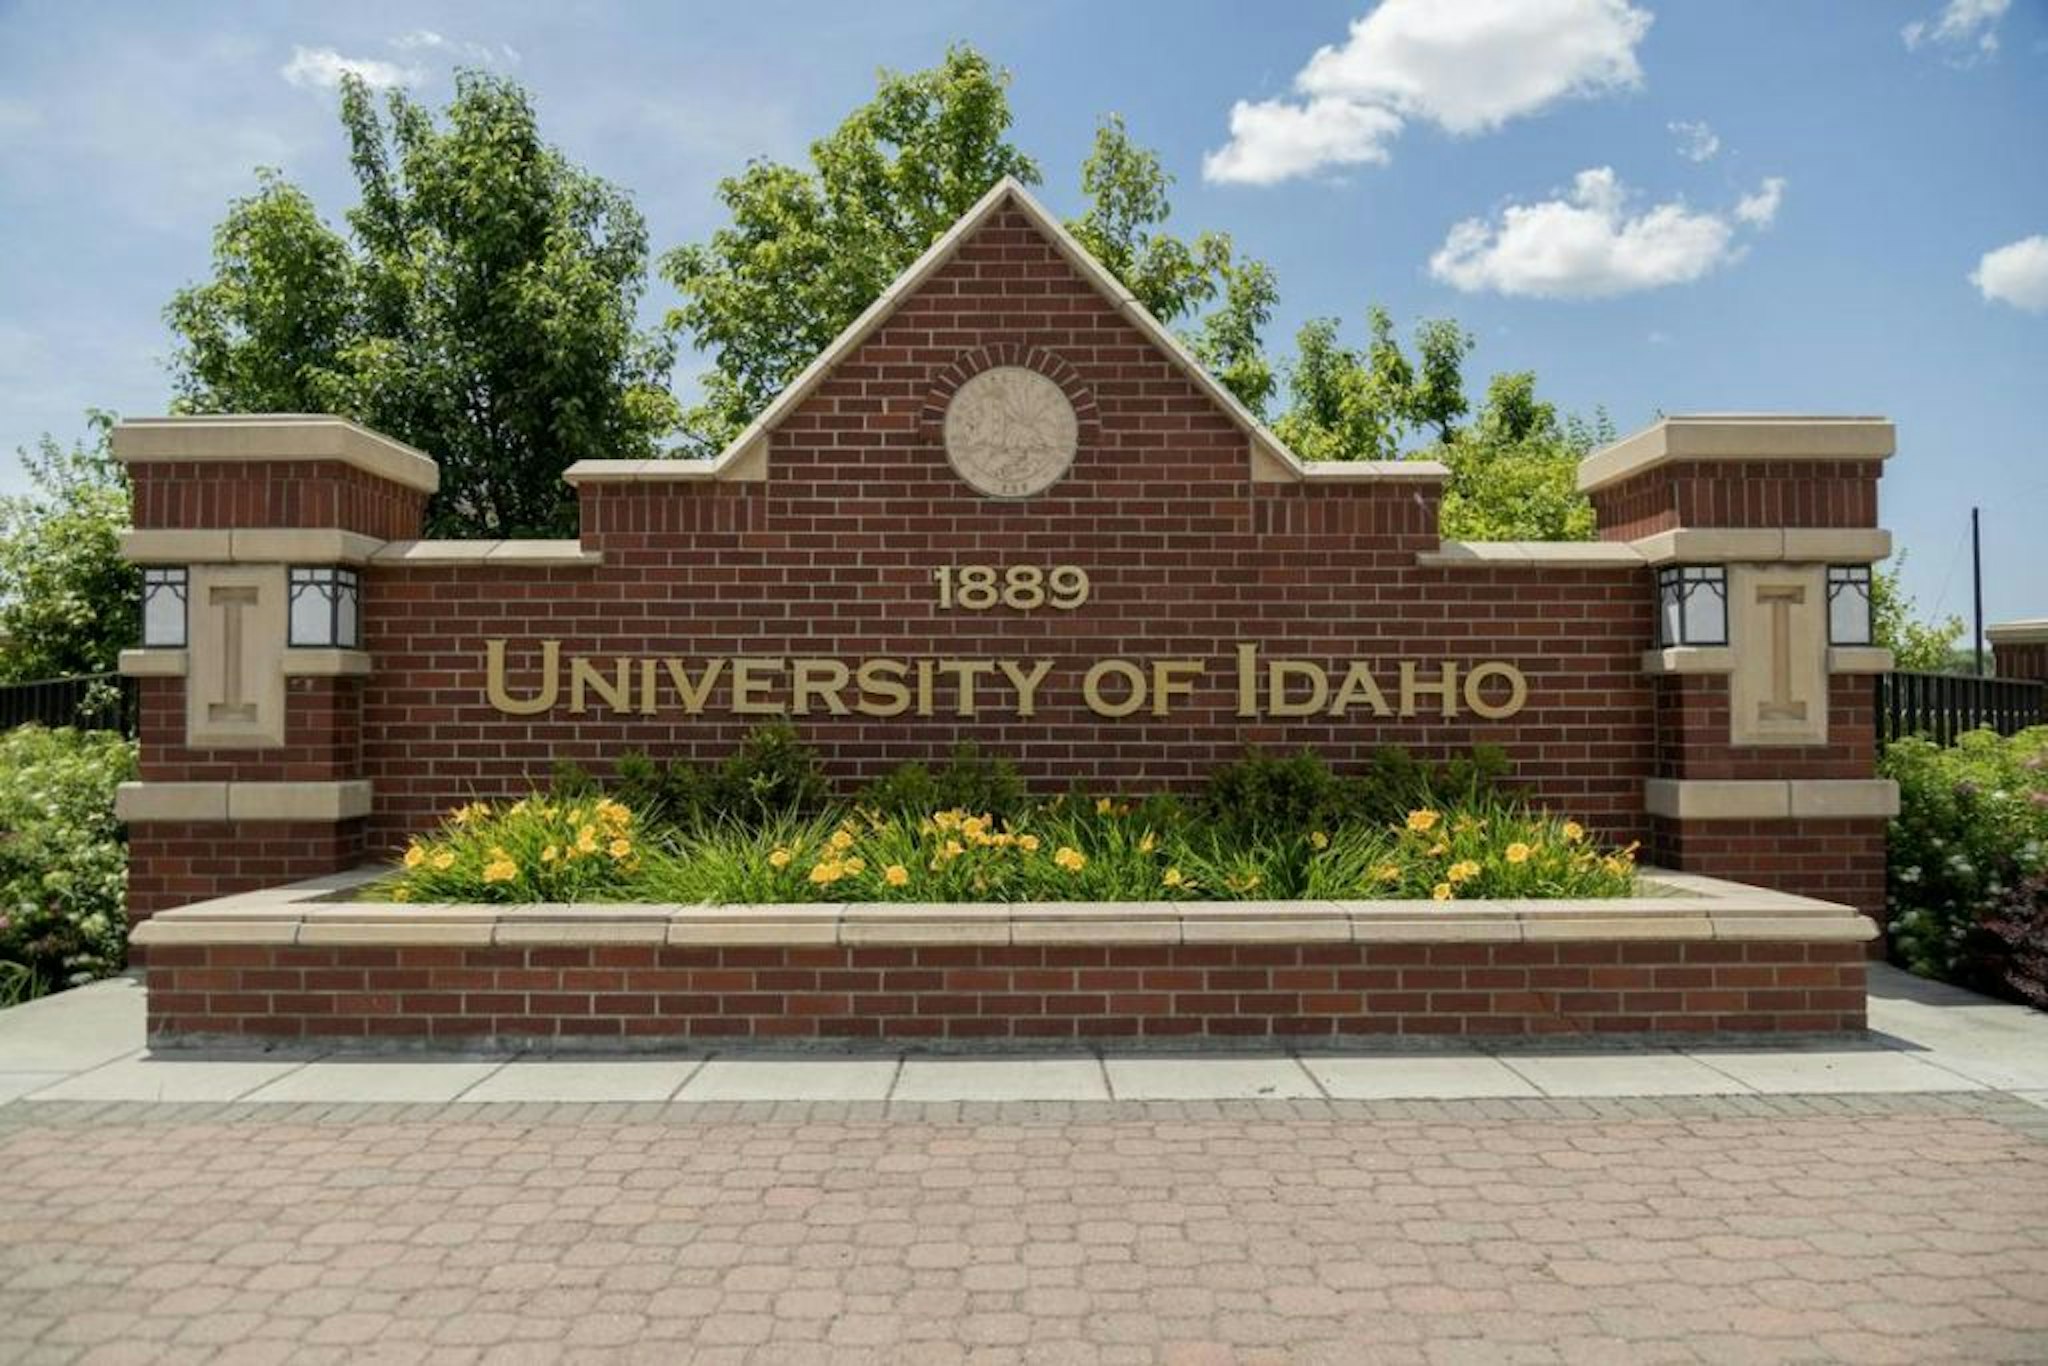 The University of Idaho's campus entrance in Moscow.